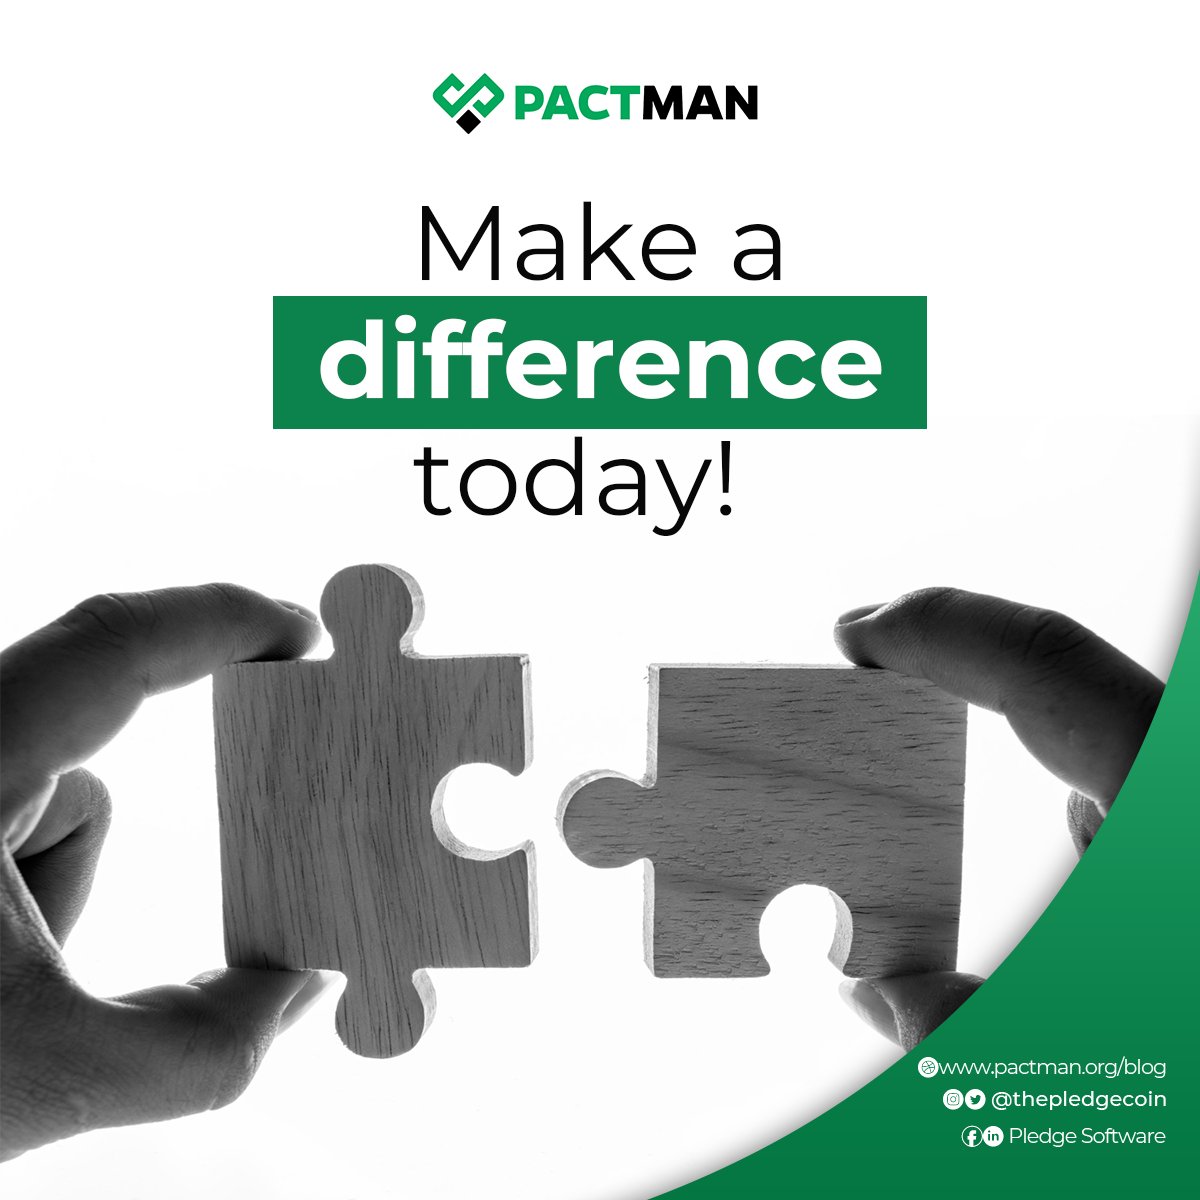 Make a difference today! 💙 

Join Pactman, the platform that connects generous donors like you to non-profit organizations making a real impact. 

Together, we can create positive change in our communities. 

#Pactman #DonateForGood #CommunityHeroes